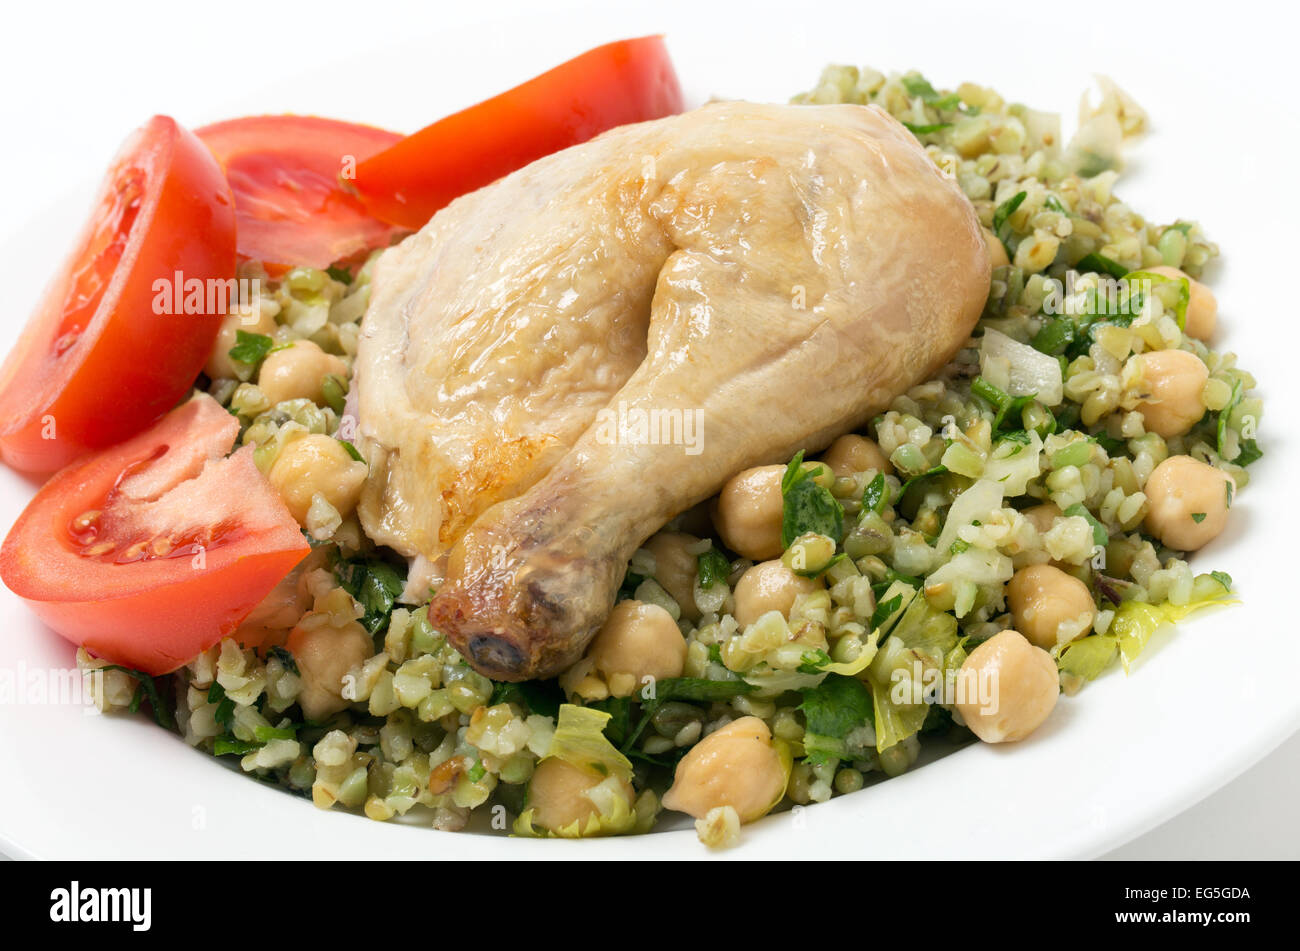 Freekeh salad with chickpeas, onion, parsley, celery, and a lemon juice and olive oil dressing, and a chicken leg with tomato Stock Photo